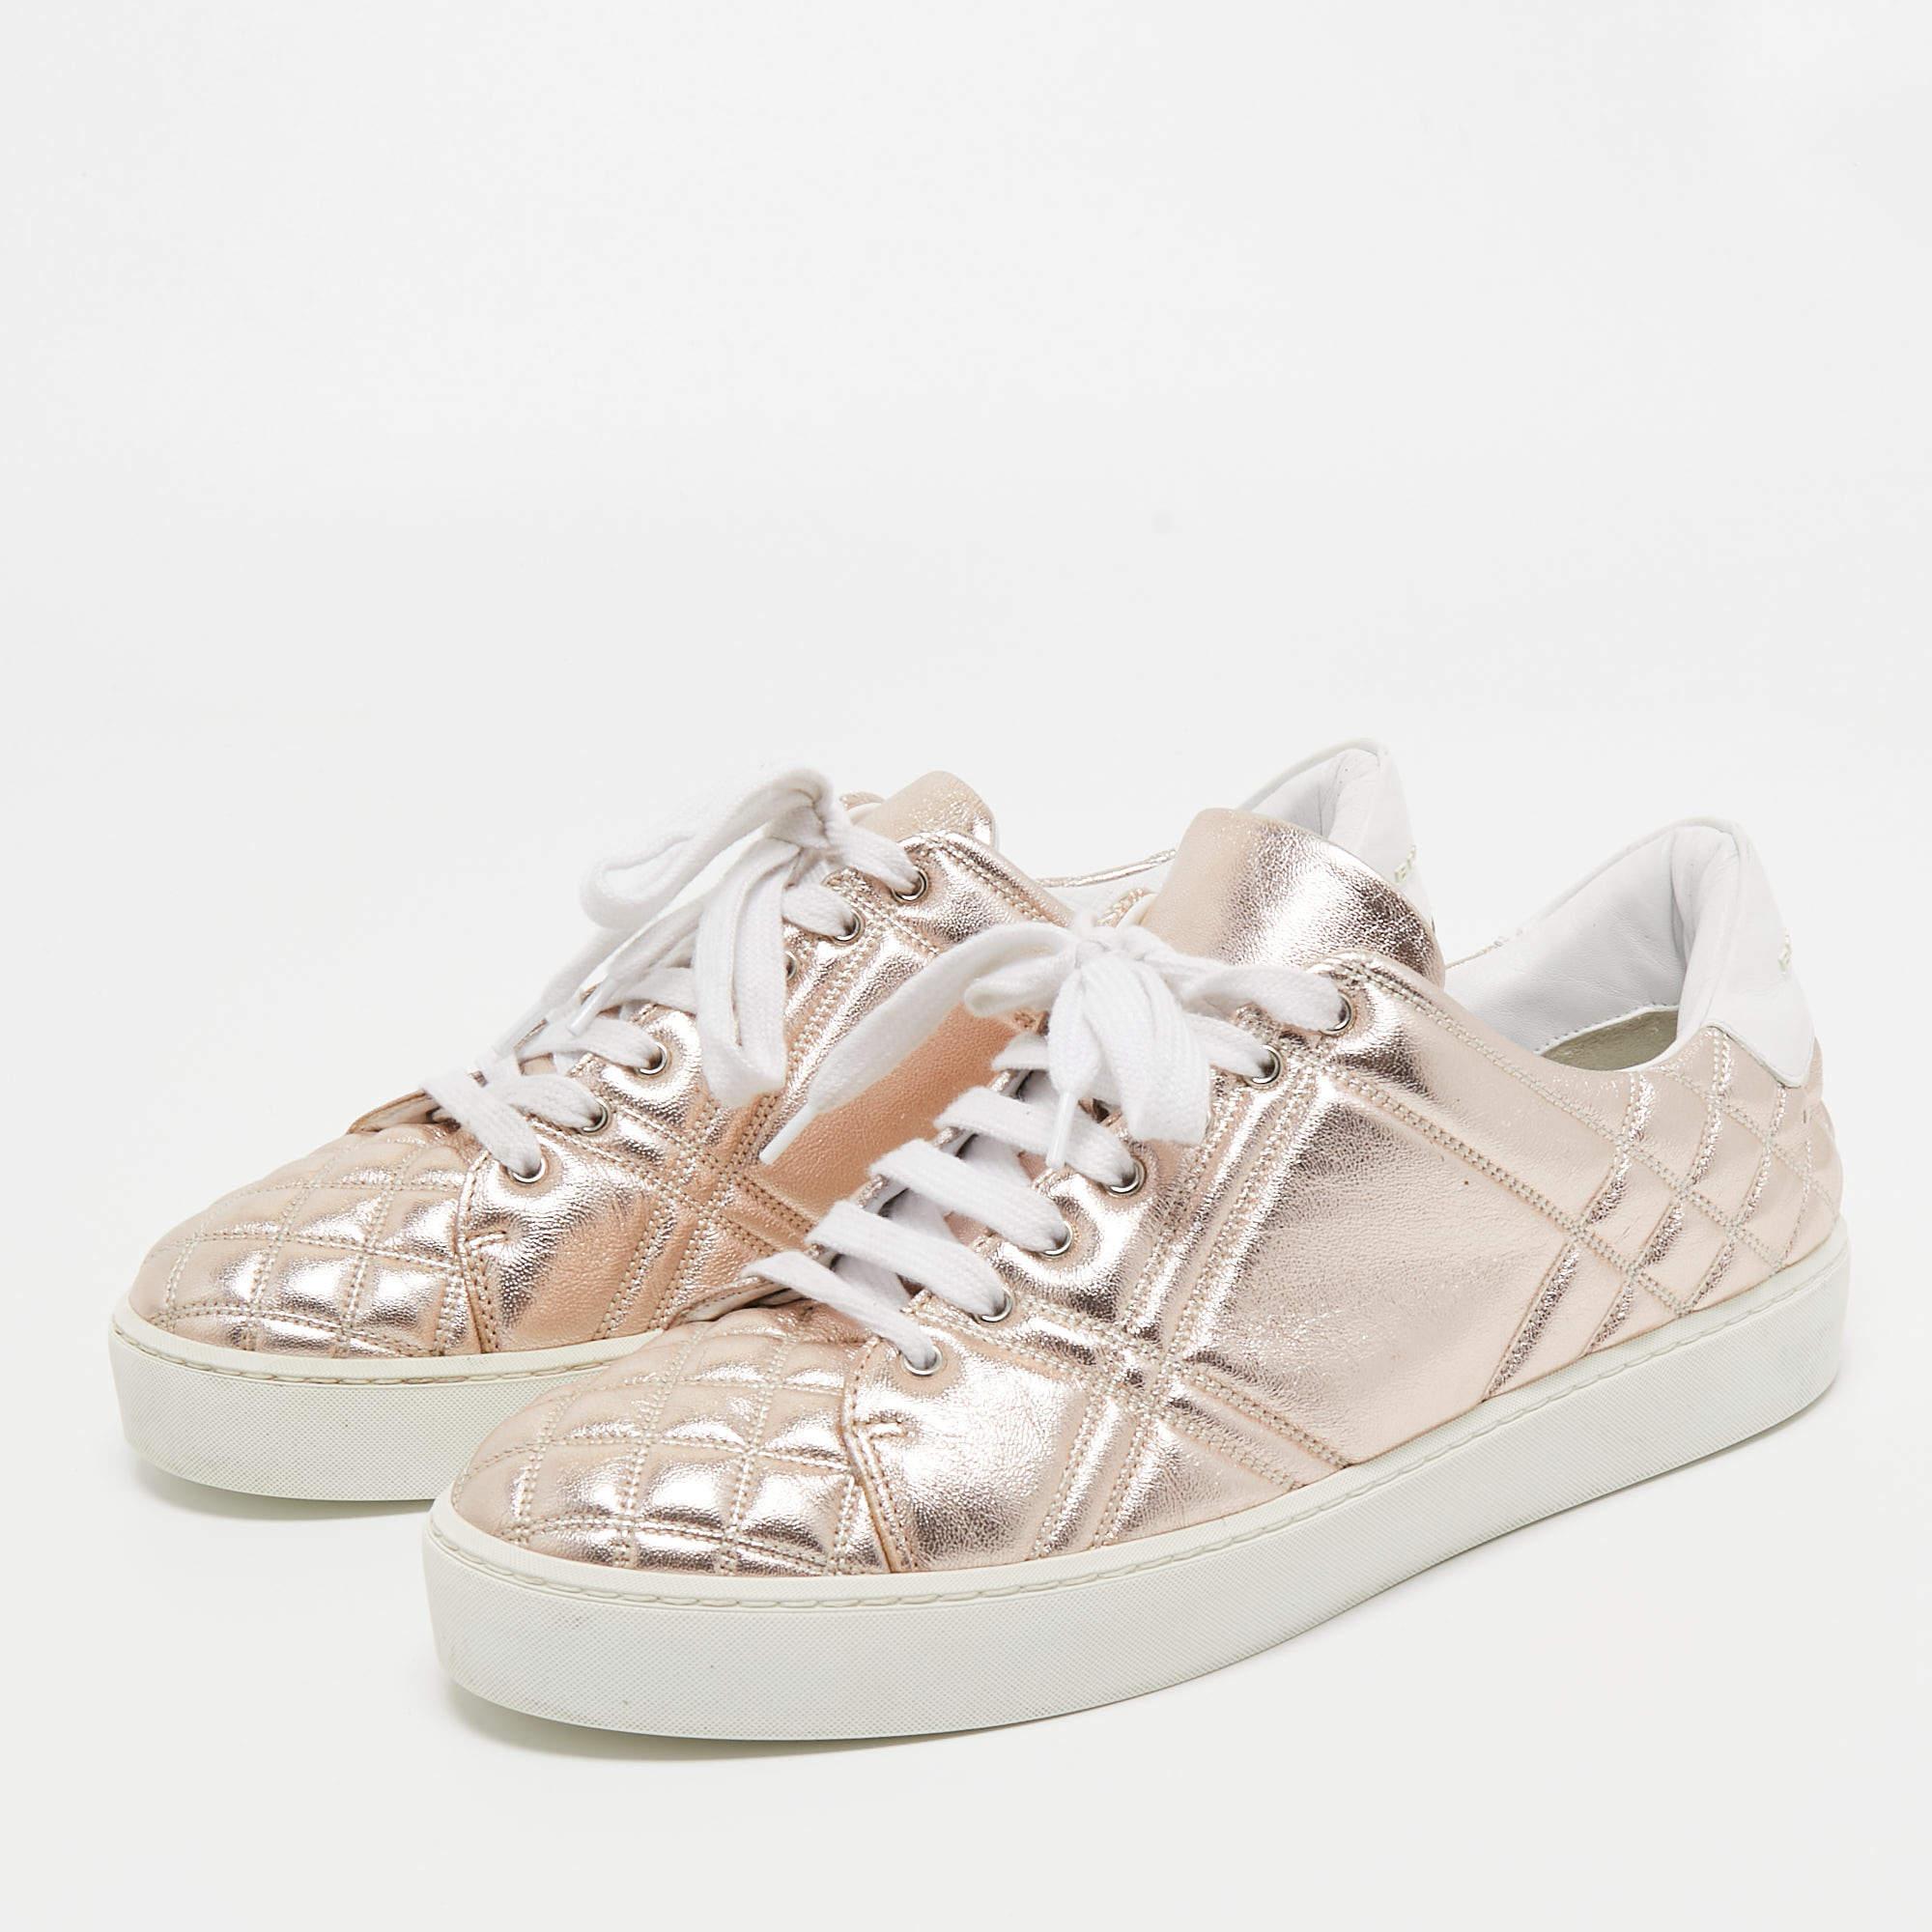 Burberry Metallic Pink Quilted Leather Westford Low Top Sneakers Size 39 1